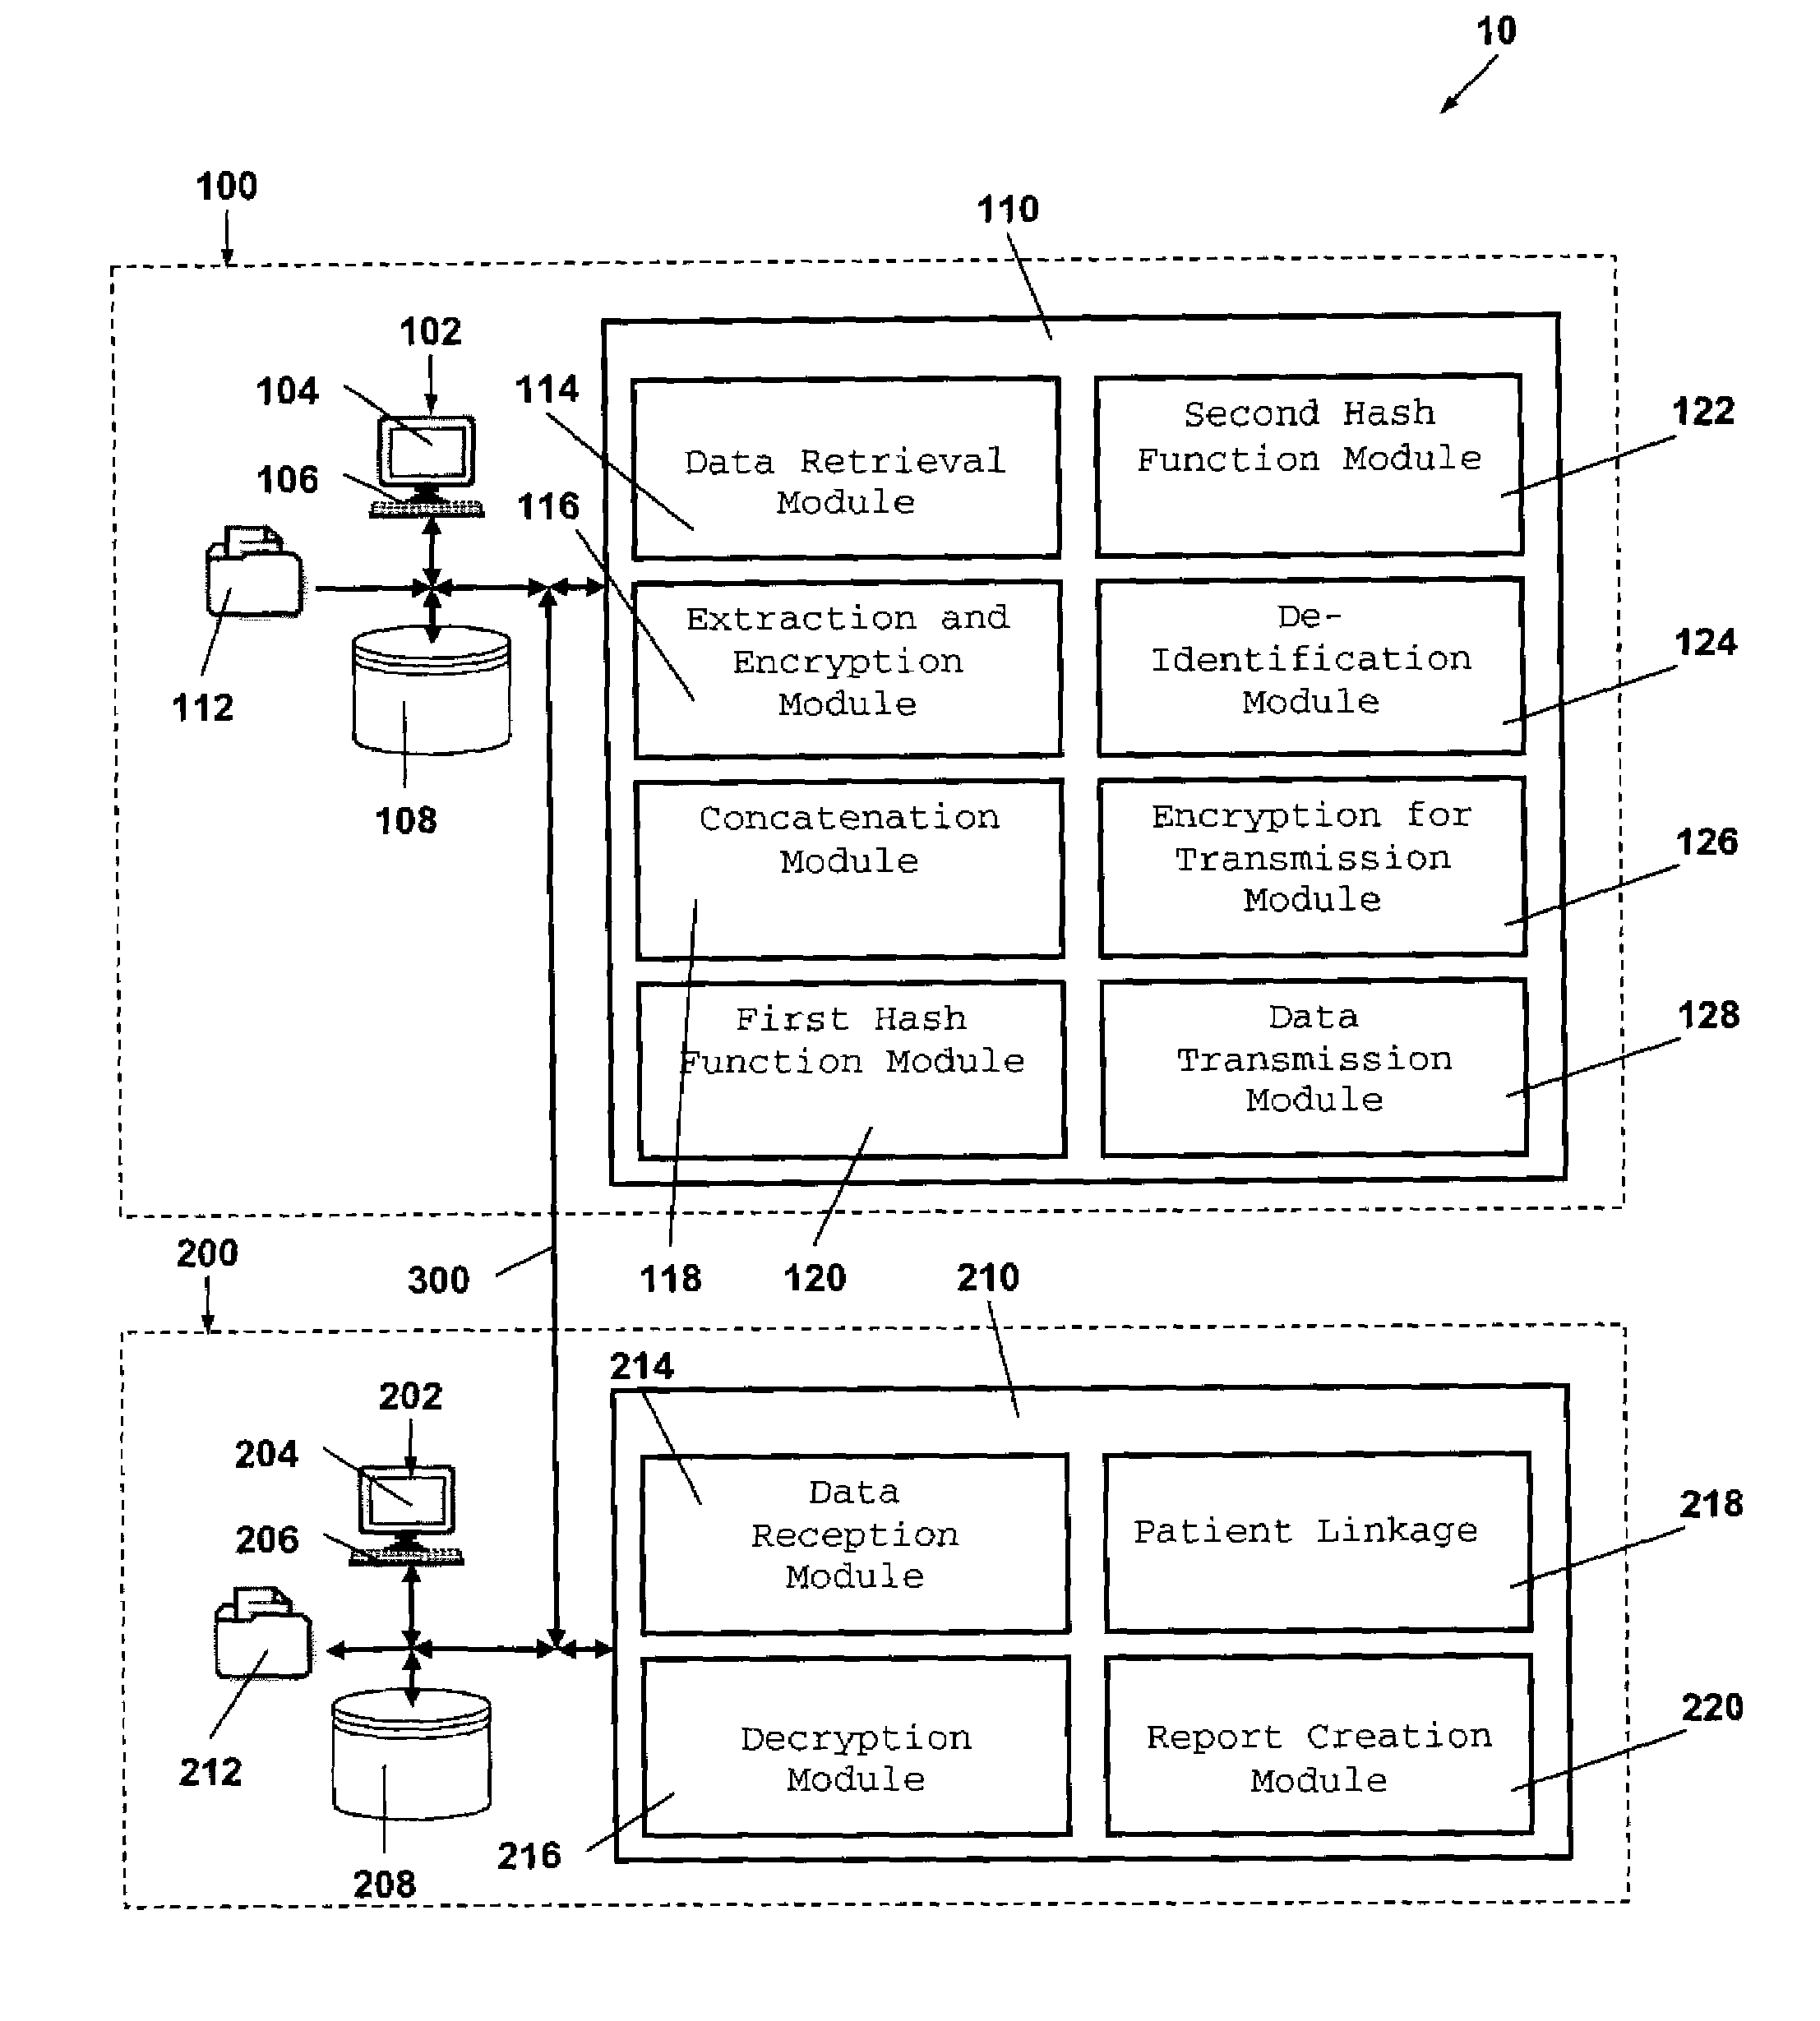 System and method for the protection and de-identification of health care data